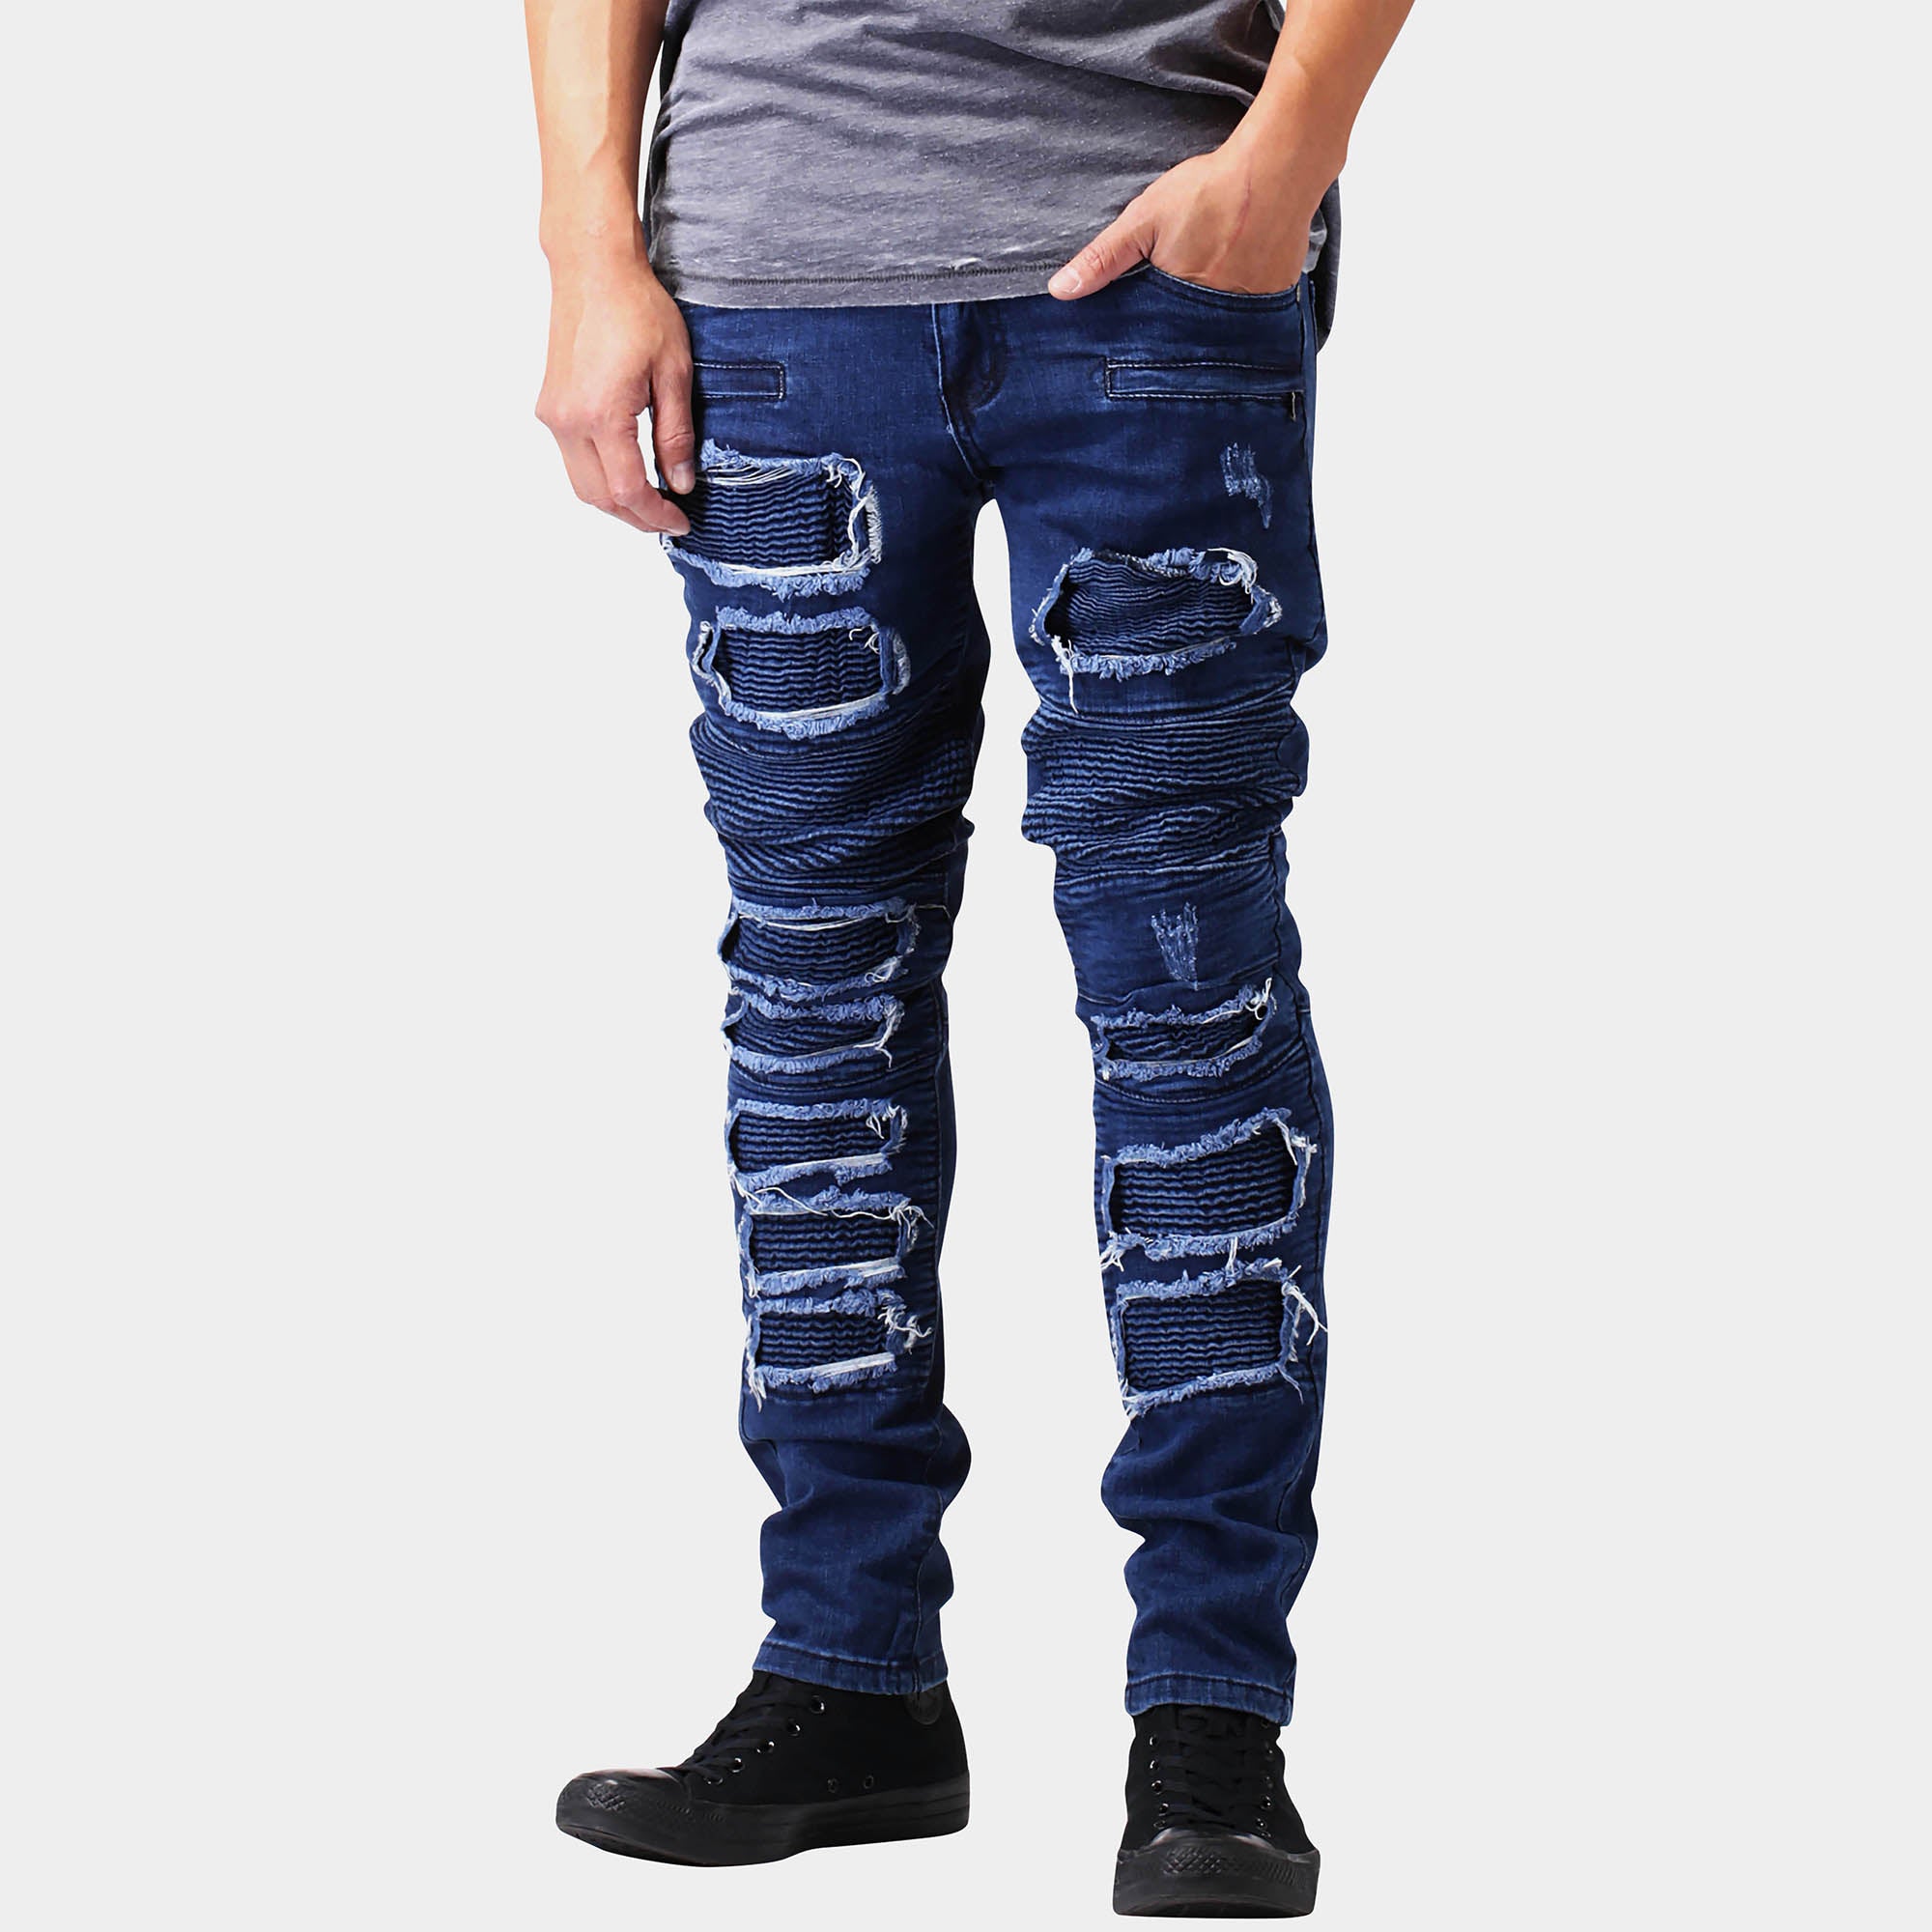 ripped jeans_black ripped jeans_distressed jeans_ripped skinny jeans_tattered jeans_boys ripped jeans_men's ripped jeans_Medium Blue